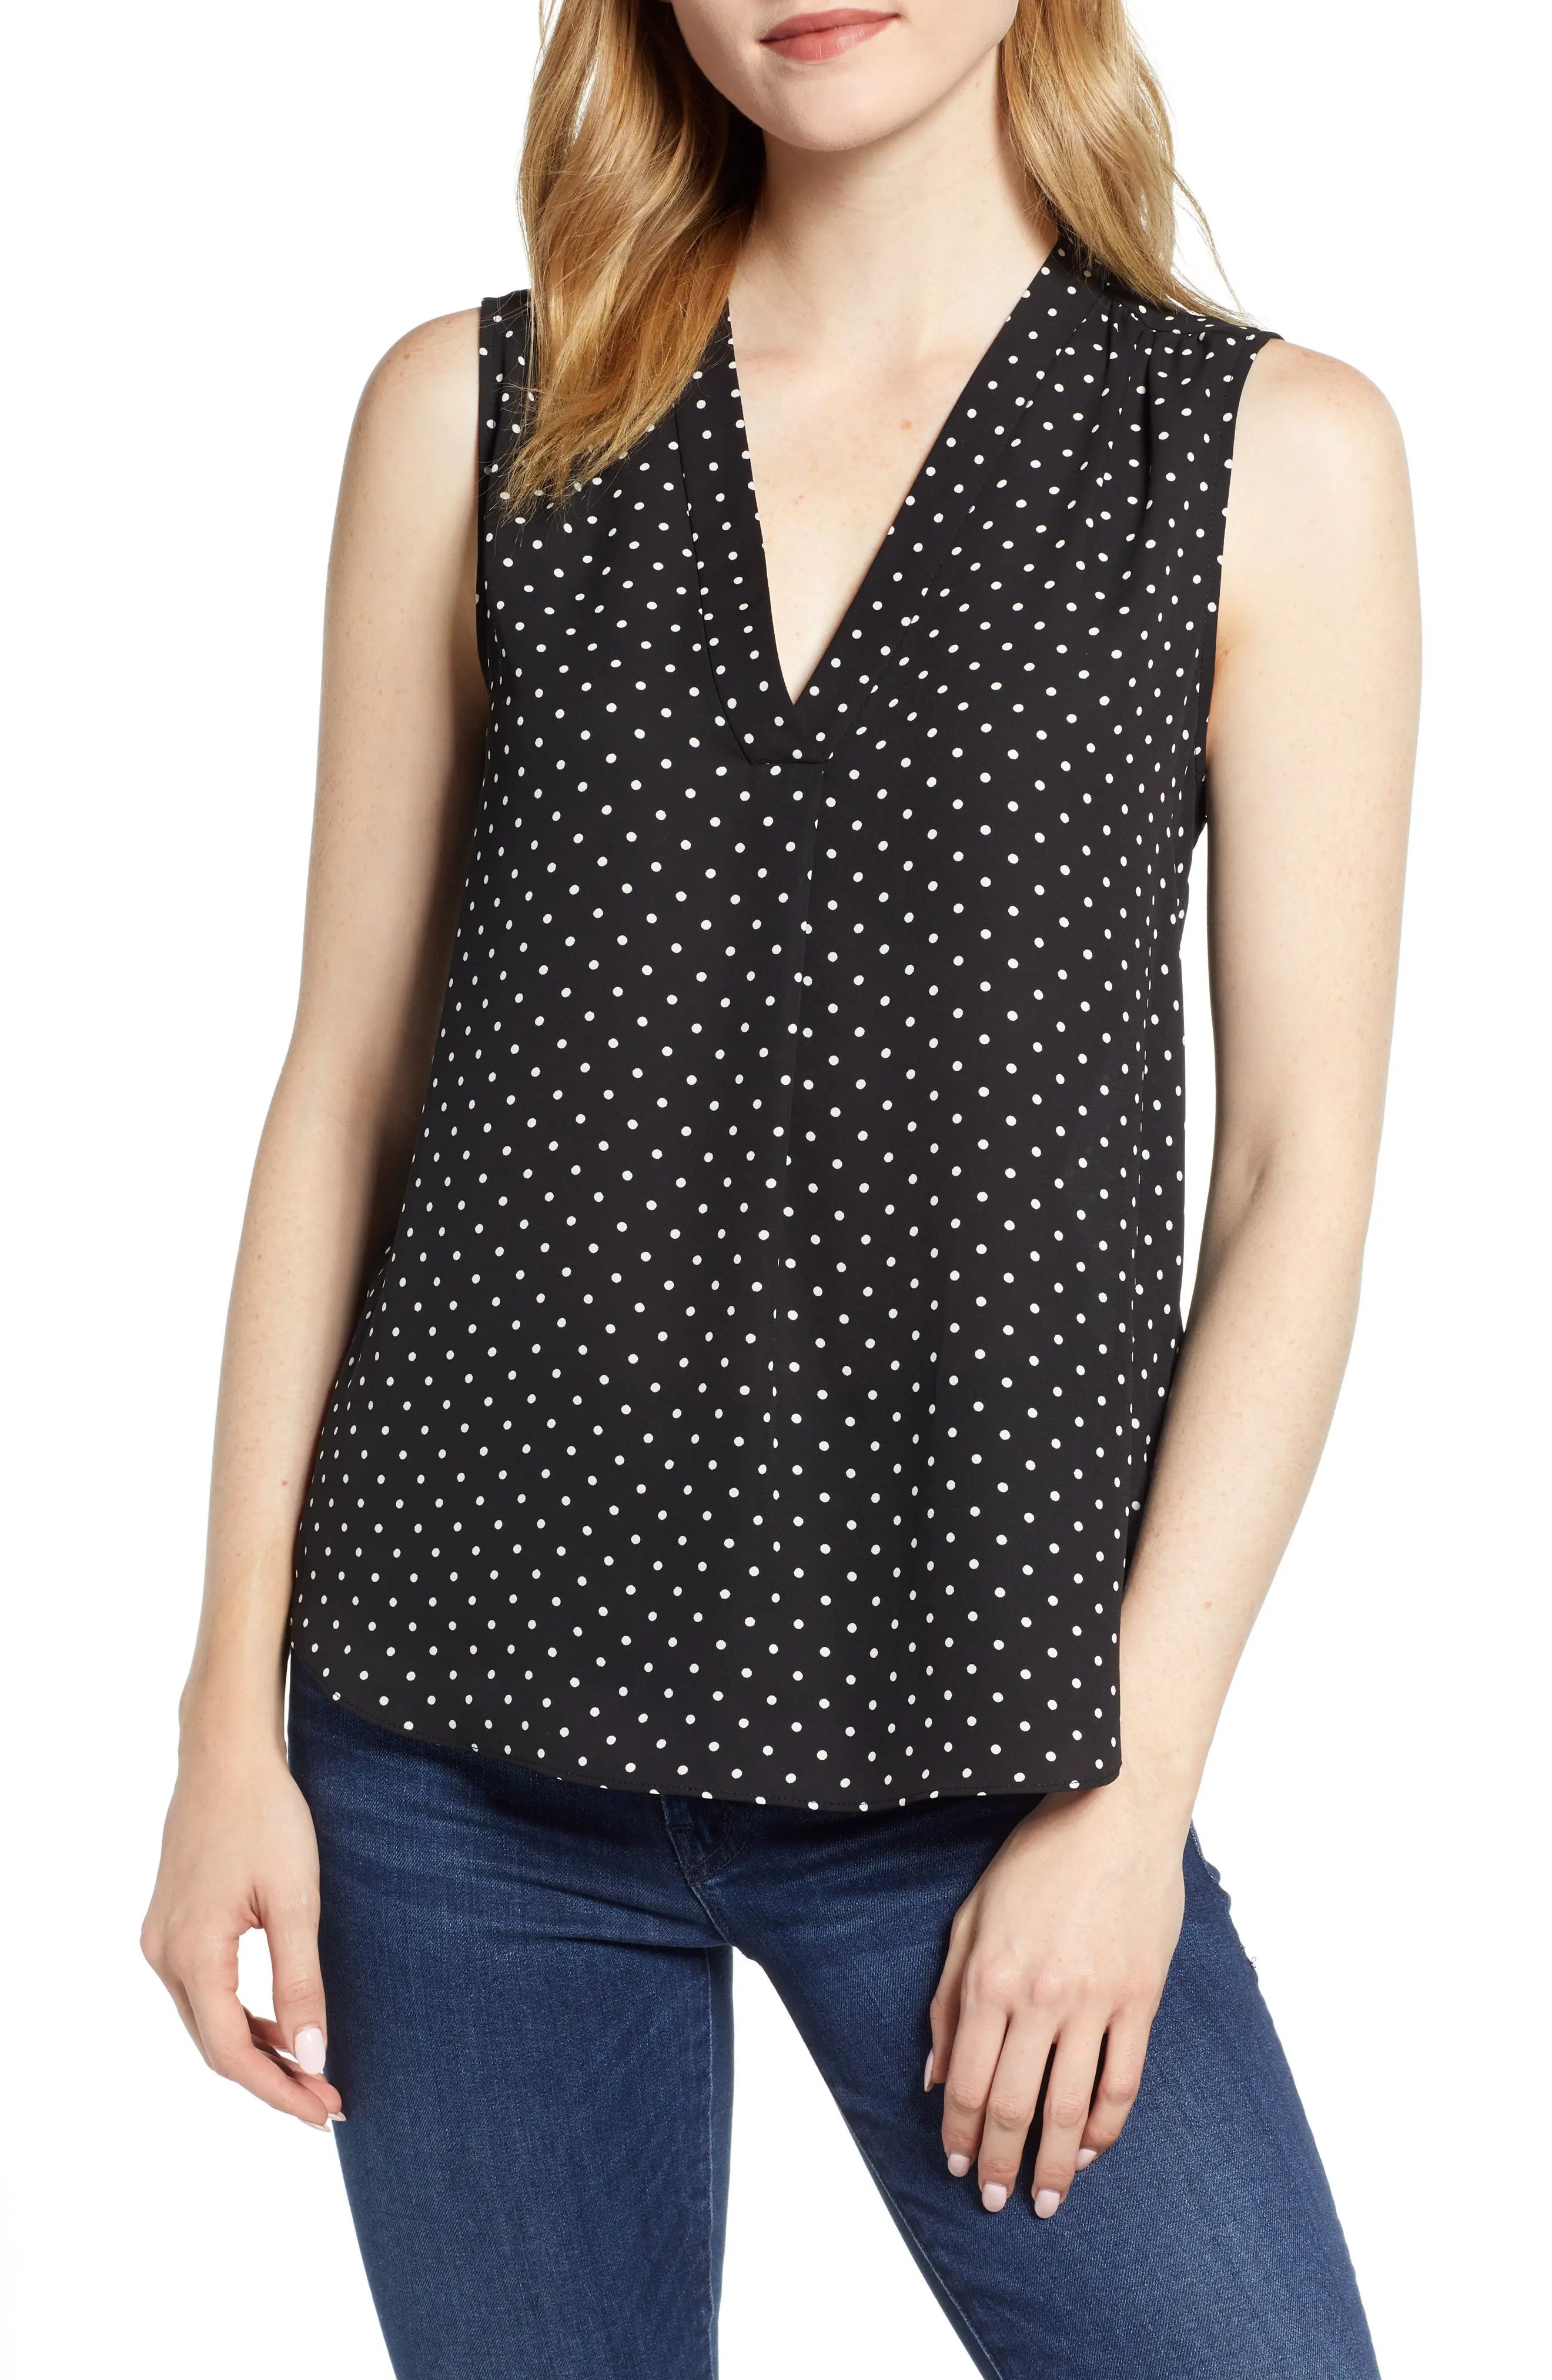 Vince Camuto Polka Dot Sleeveless Blouse in Rich Black at Nordstrom, Size X-Small | Nordstrom